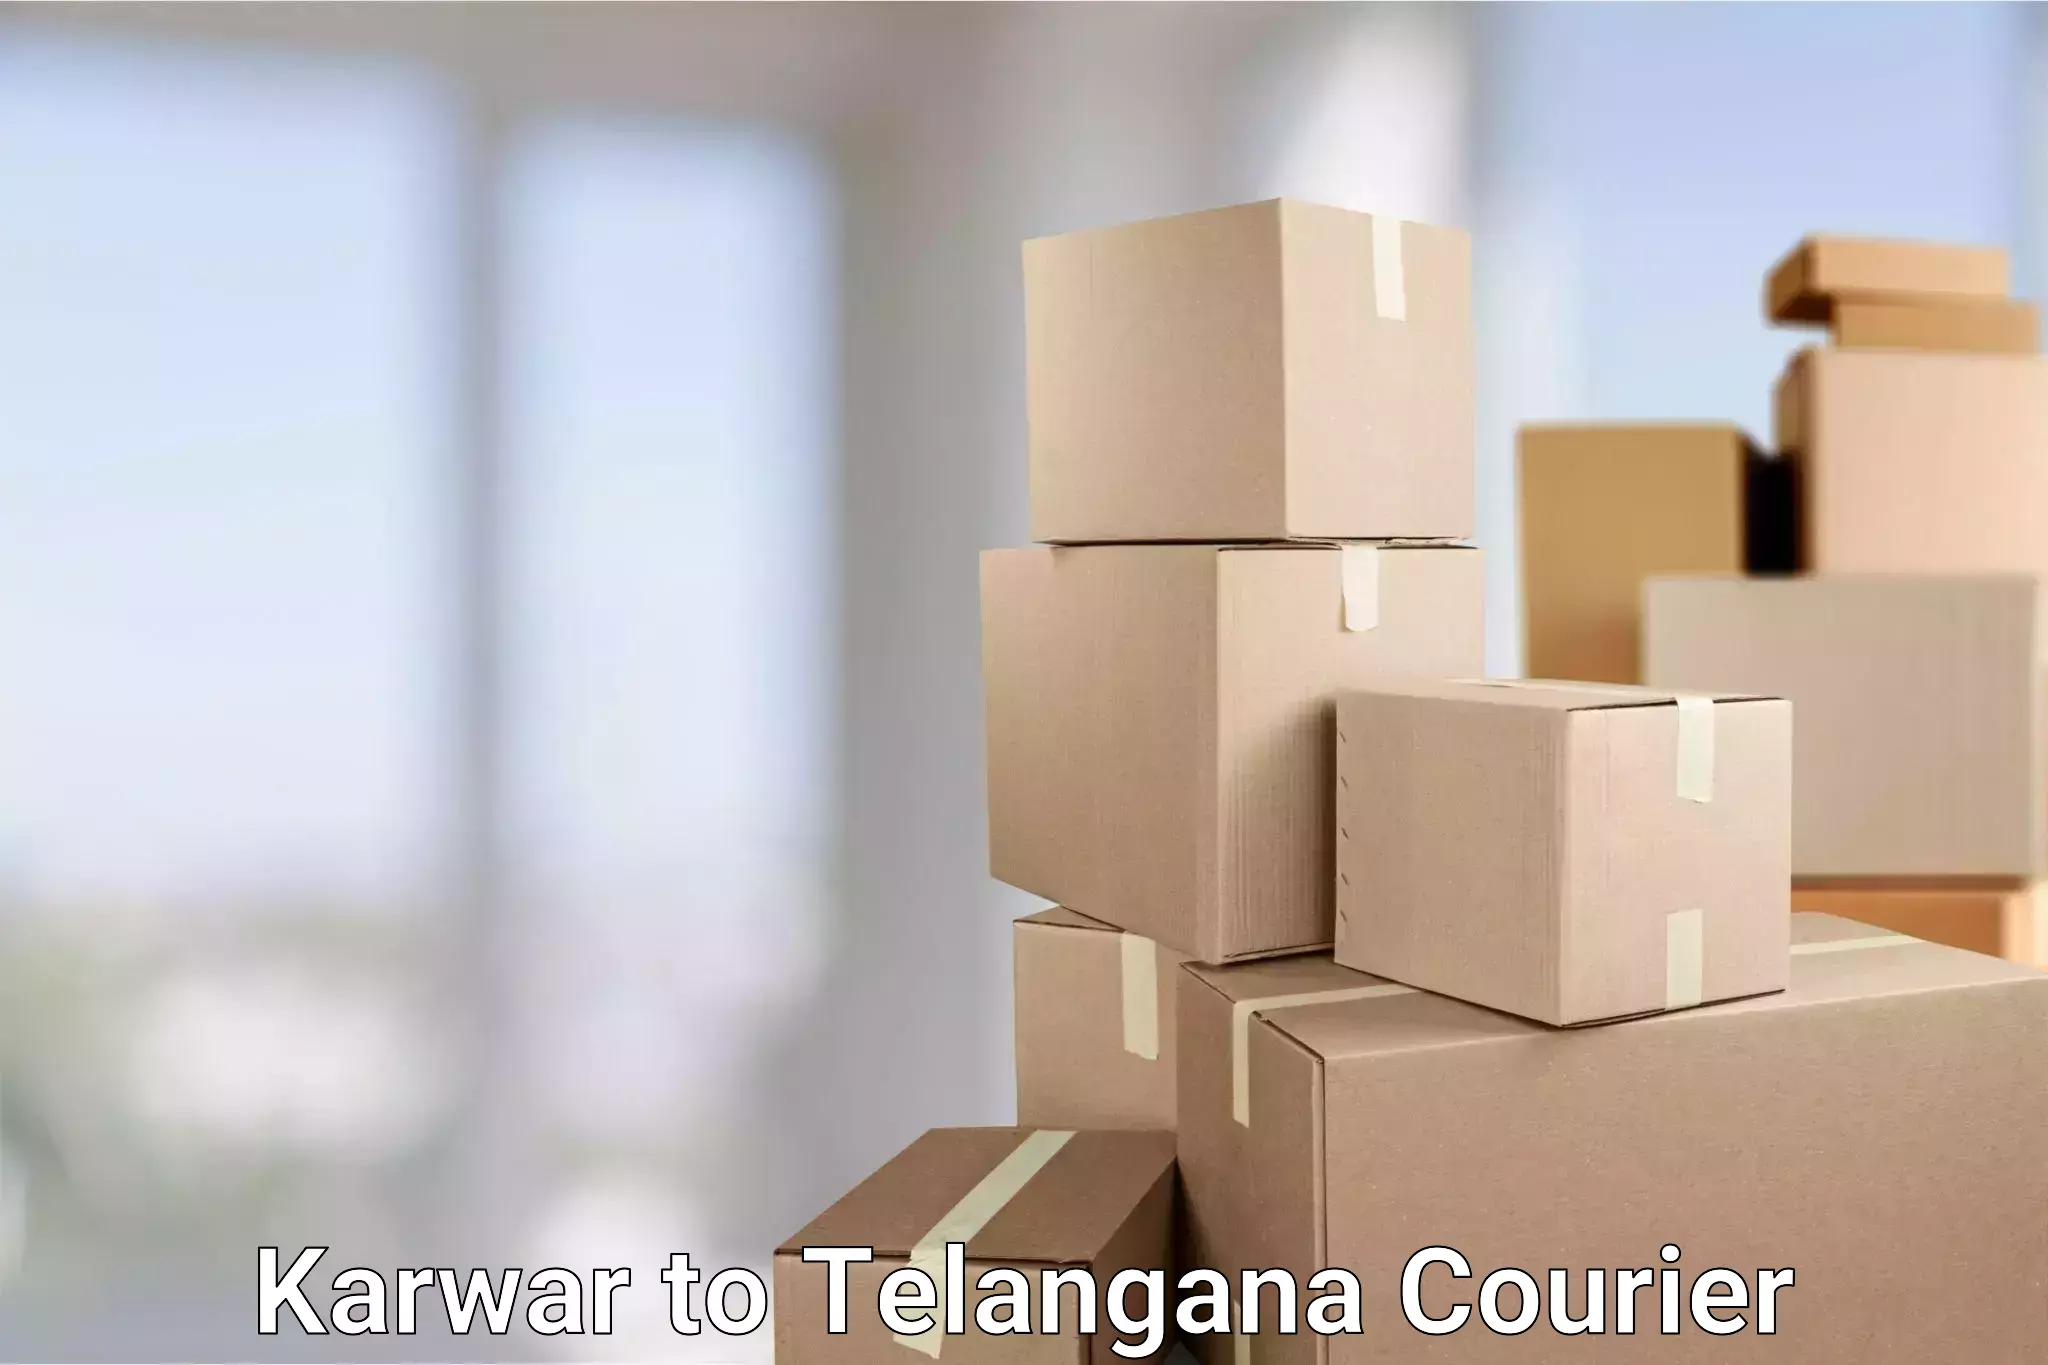 Bulk courier orders in Karwar to Sathupally